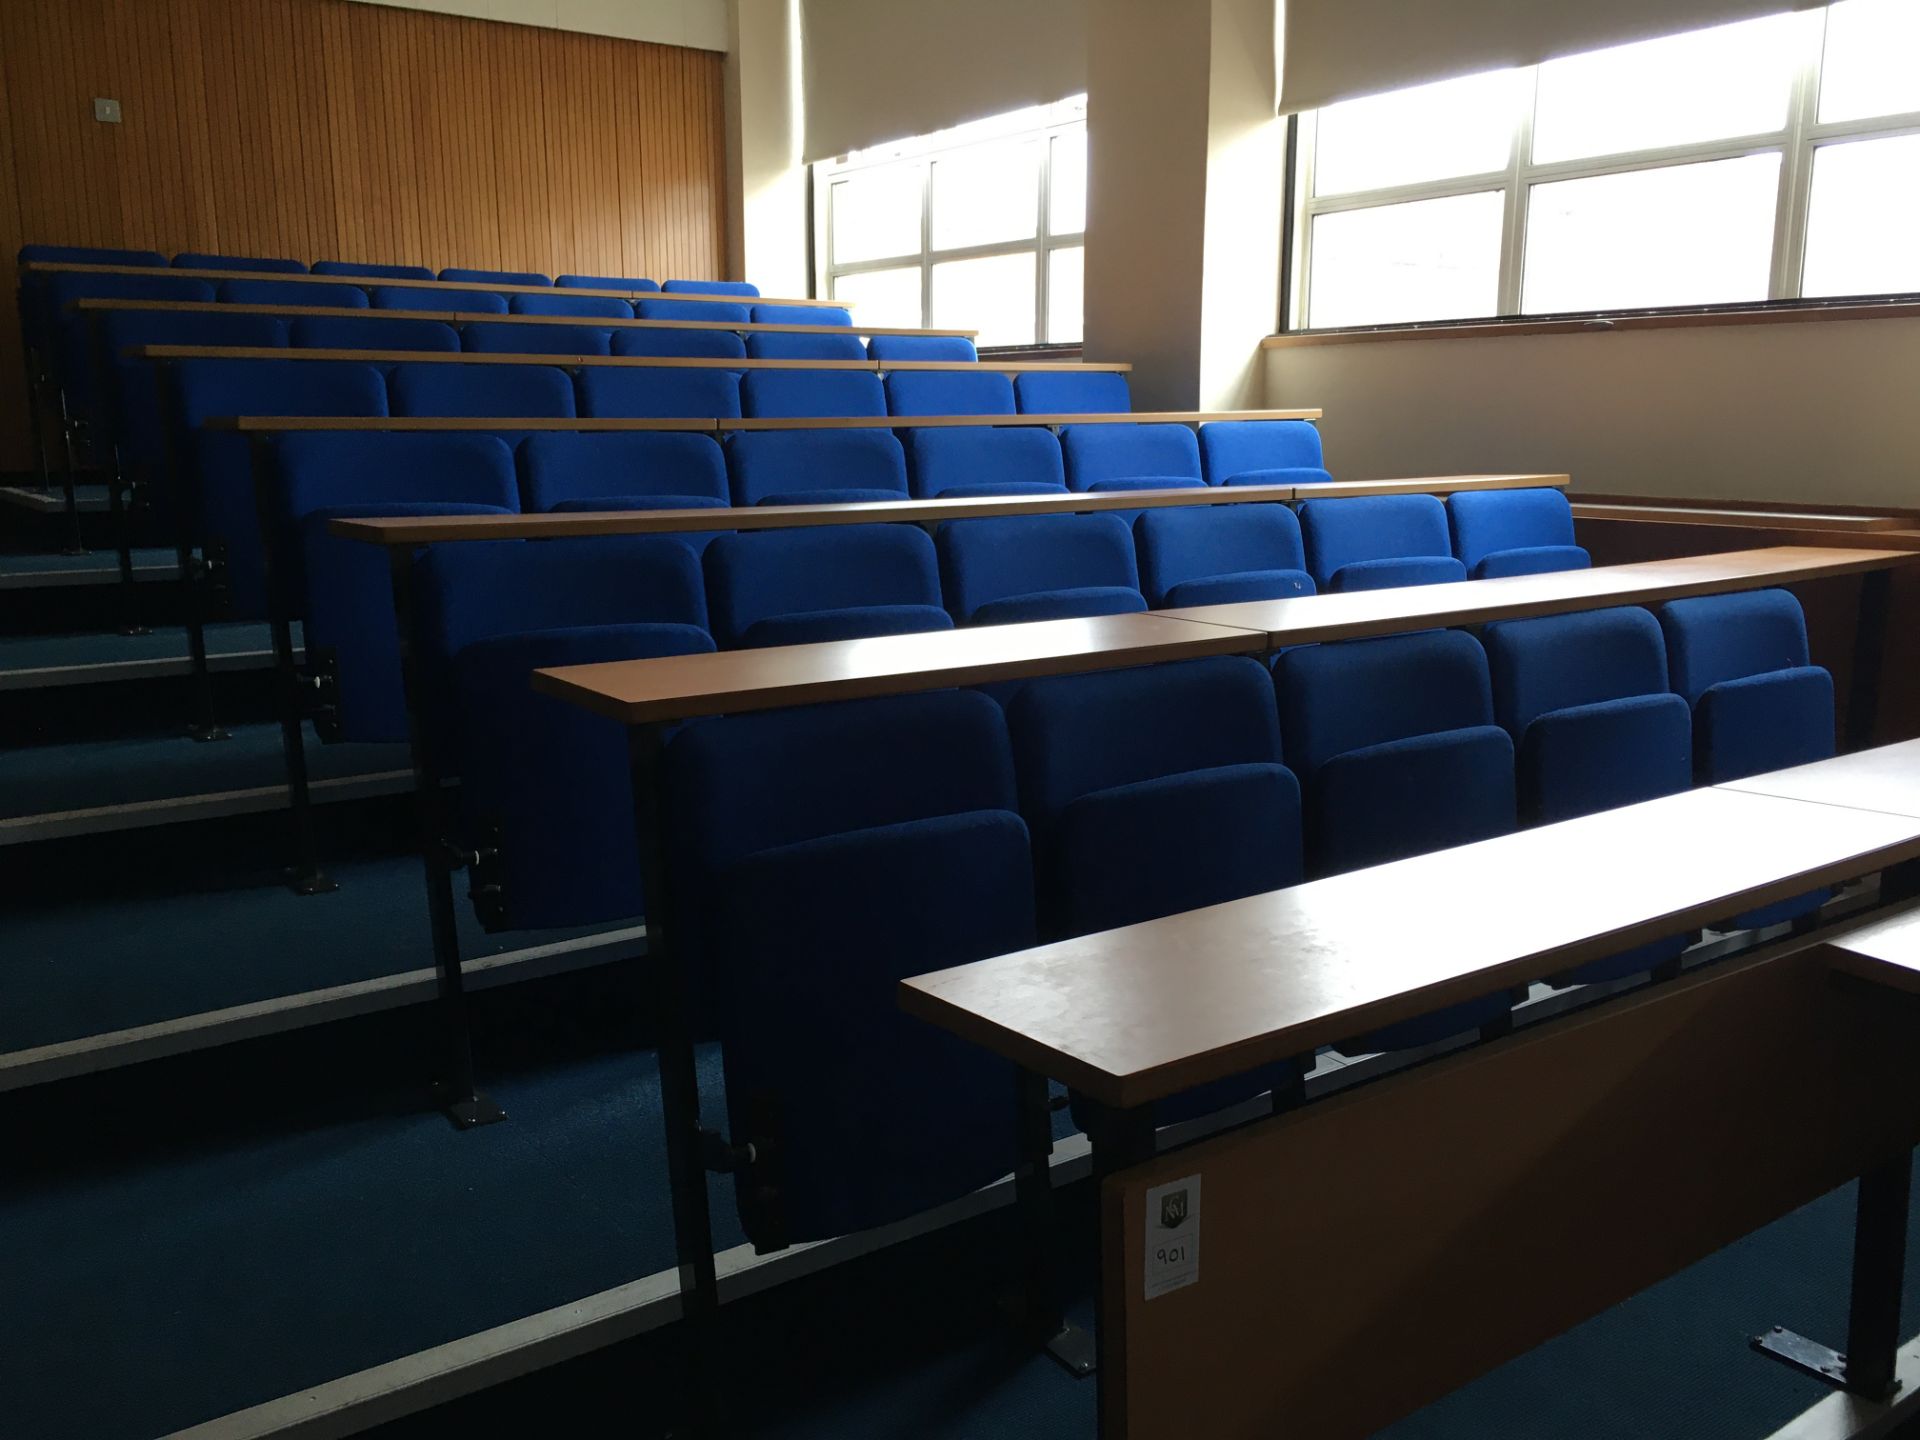 Bank of lecture theatre seats, 7 rows x 41 seats